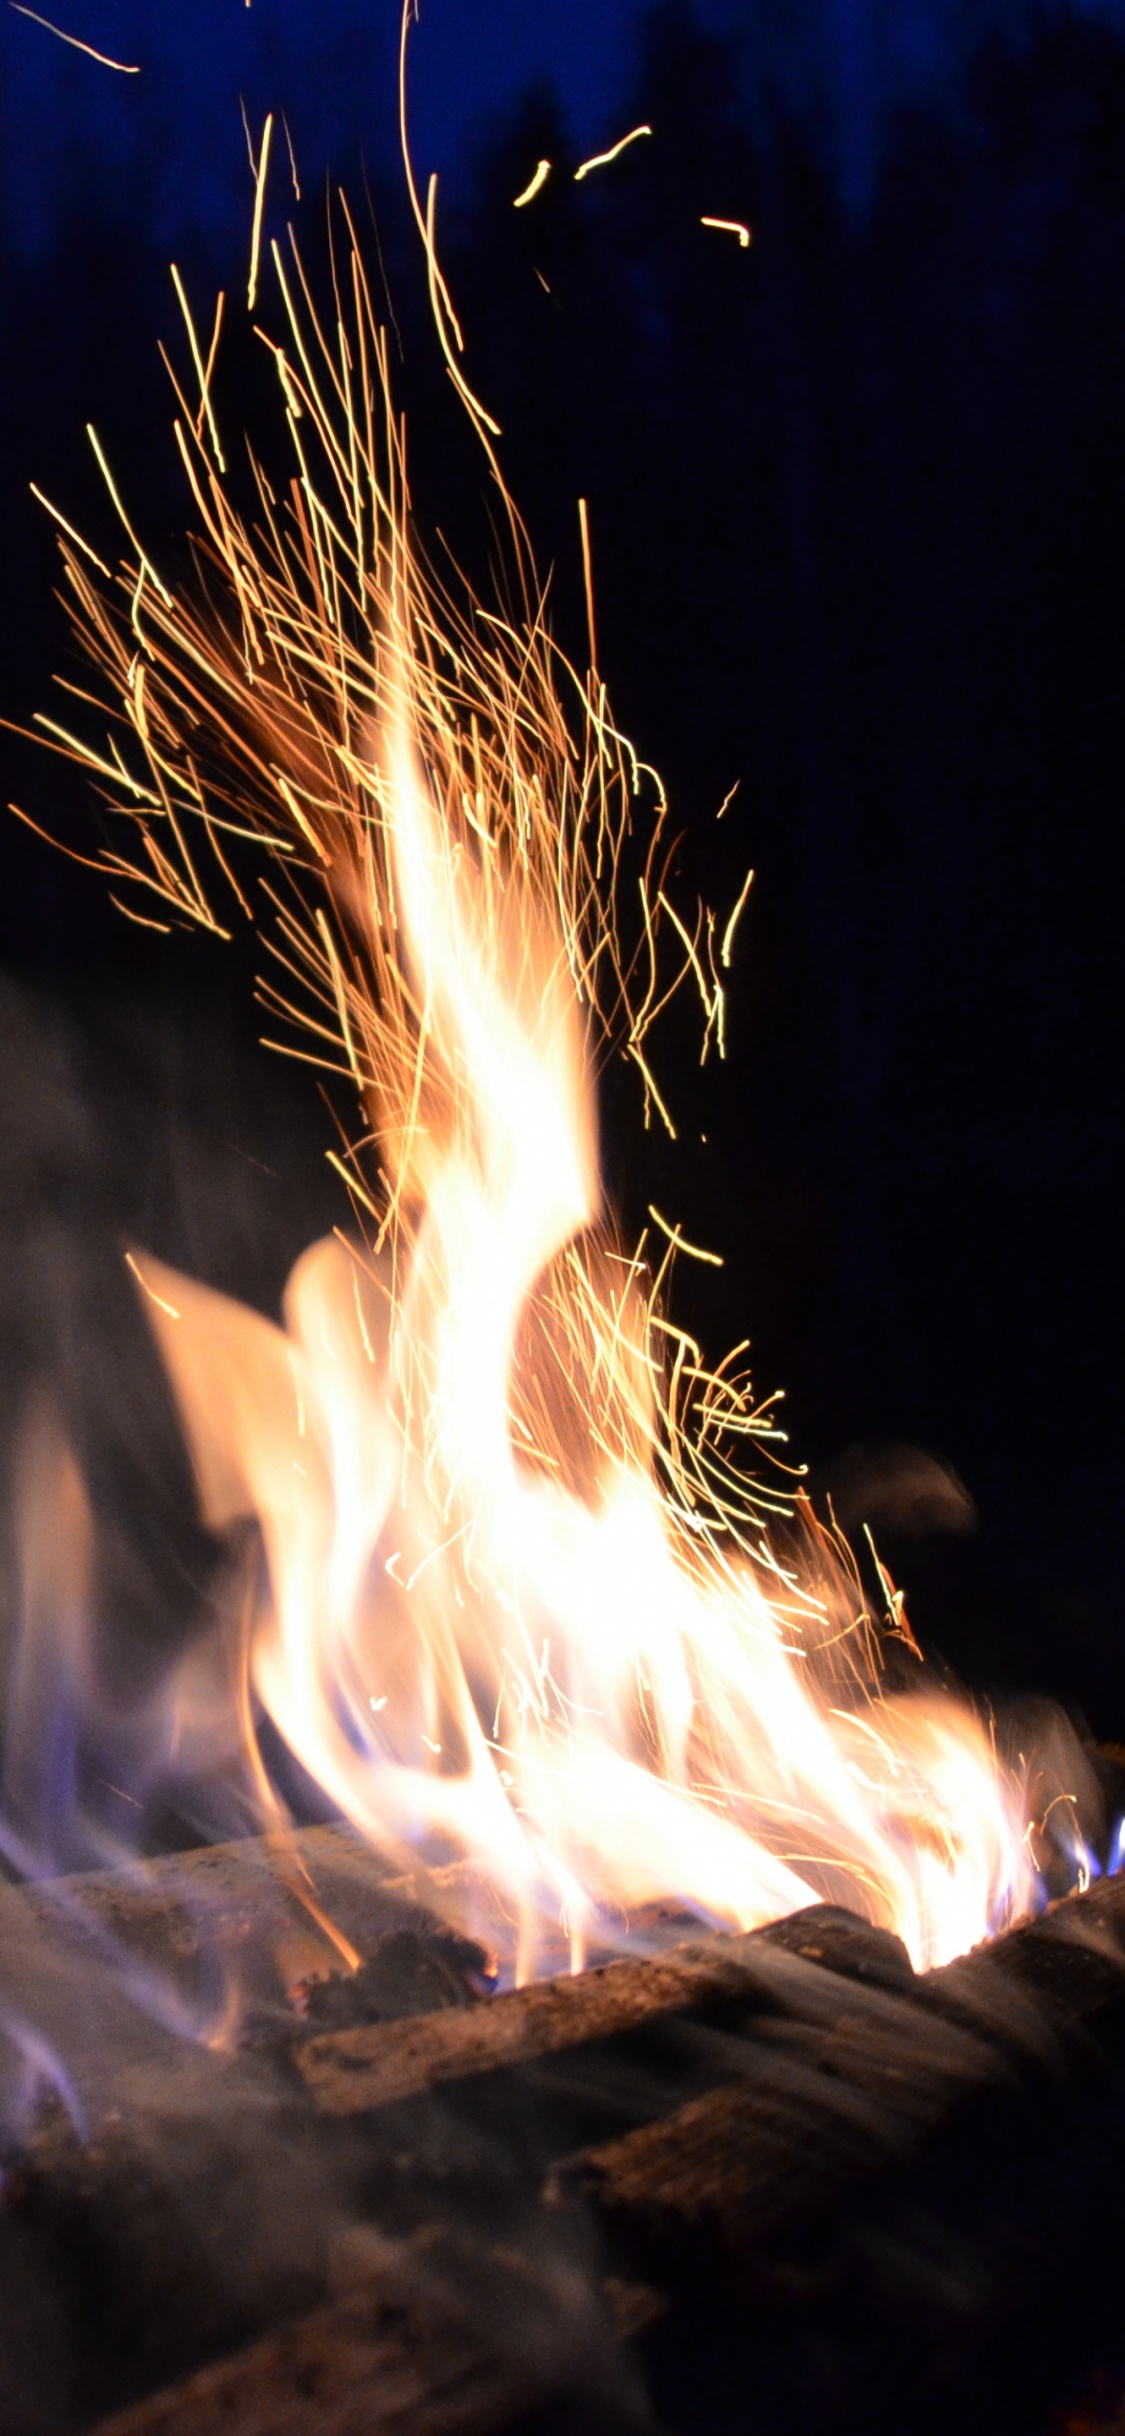 Time Lapse Photography of Fire. Wallpaper in 1125x2436 Resolution